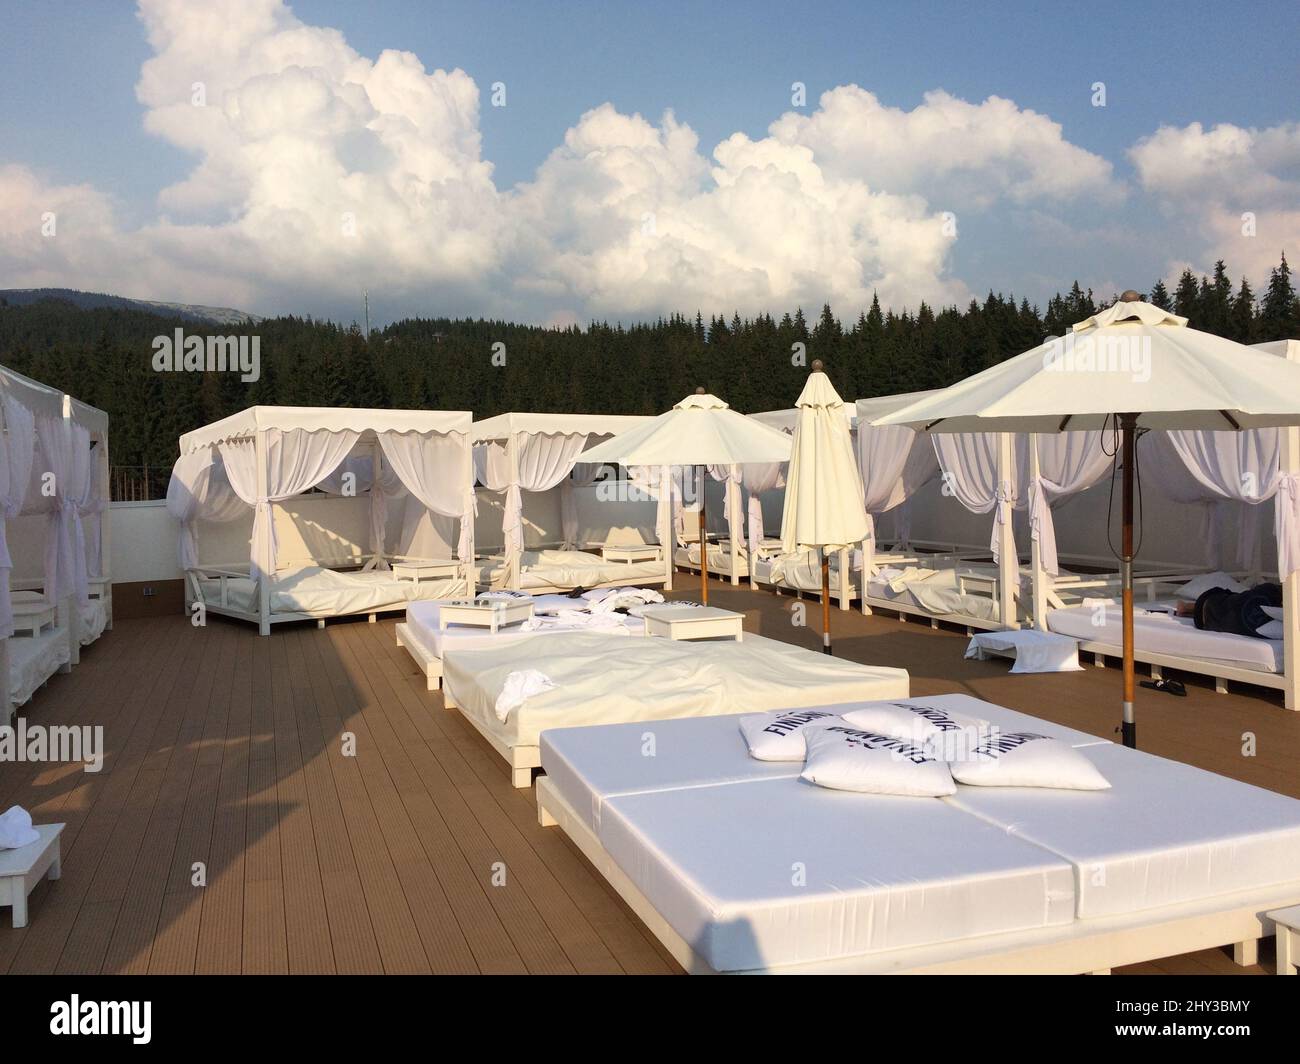 White canopy daybeds, parasols, and deck chairs in an enclosed area surrounded by dense forests Stock Photo